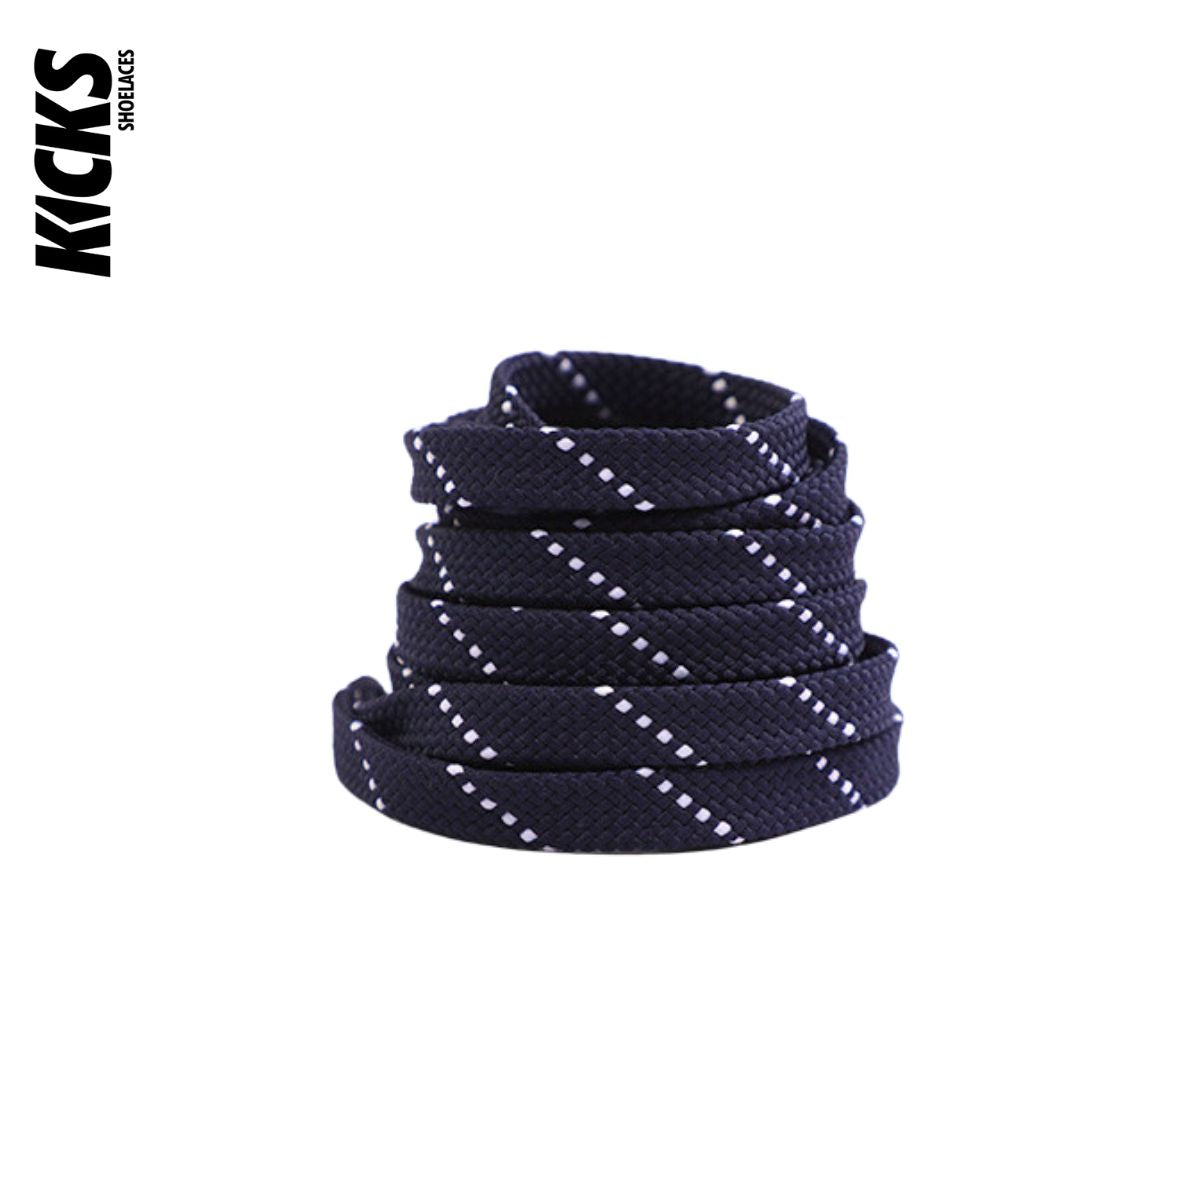 Navy-Blue-White-Dot-Patterned-Shoelaces